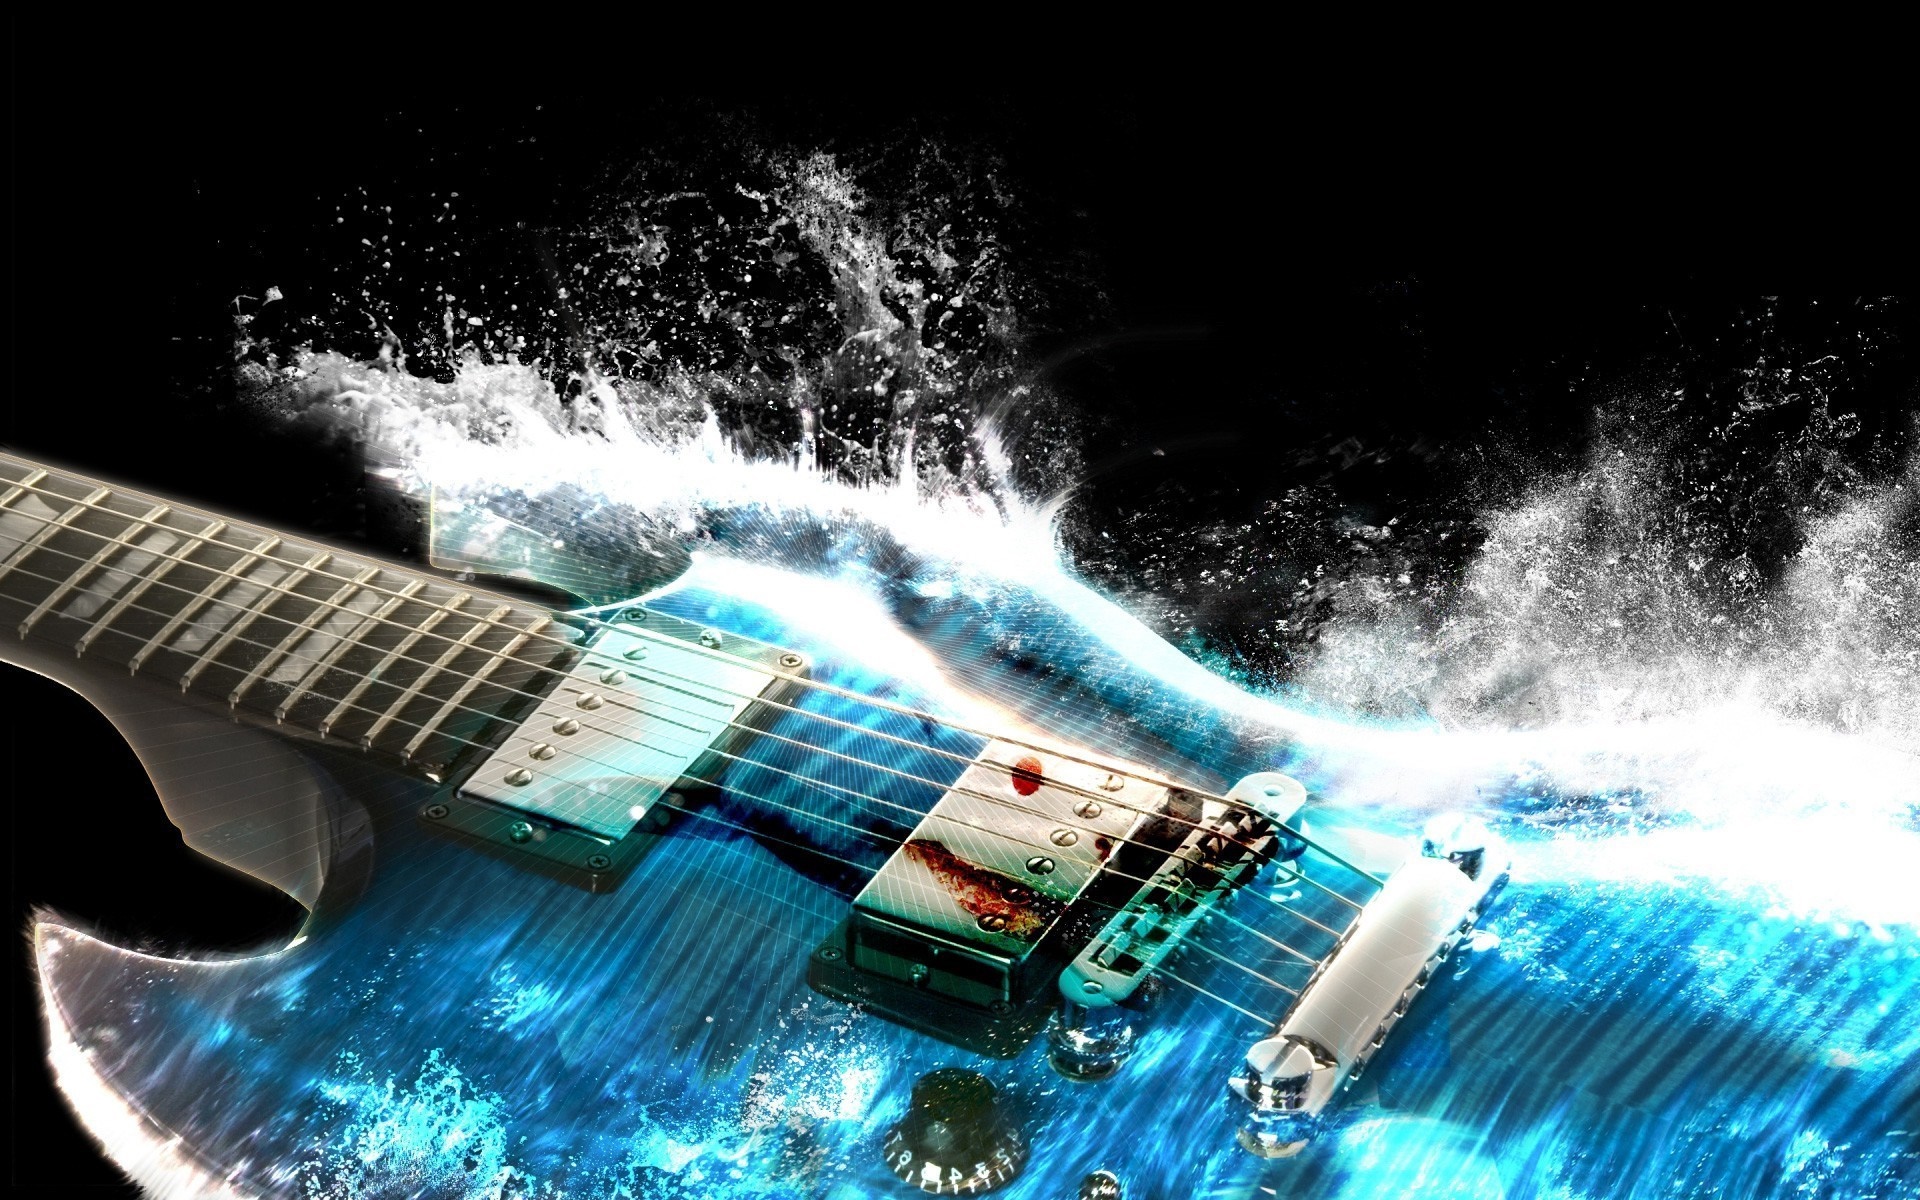 guitar wallpaper,guitar,electric guitar,string instrument,water,plucked string instruments